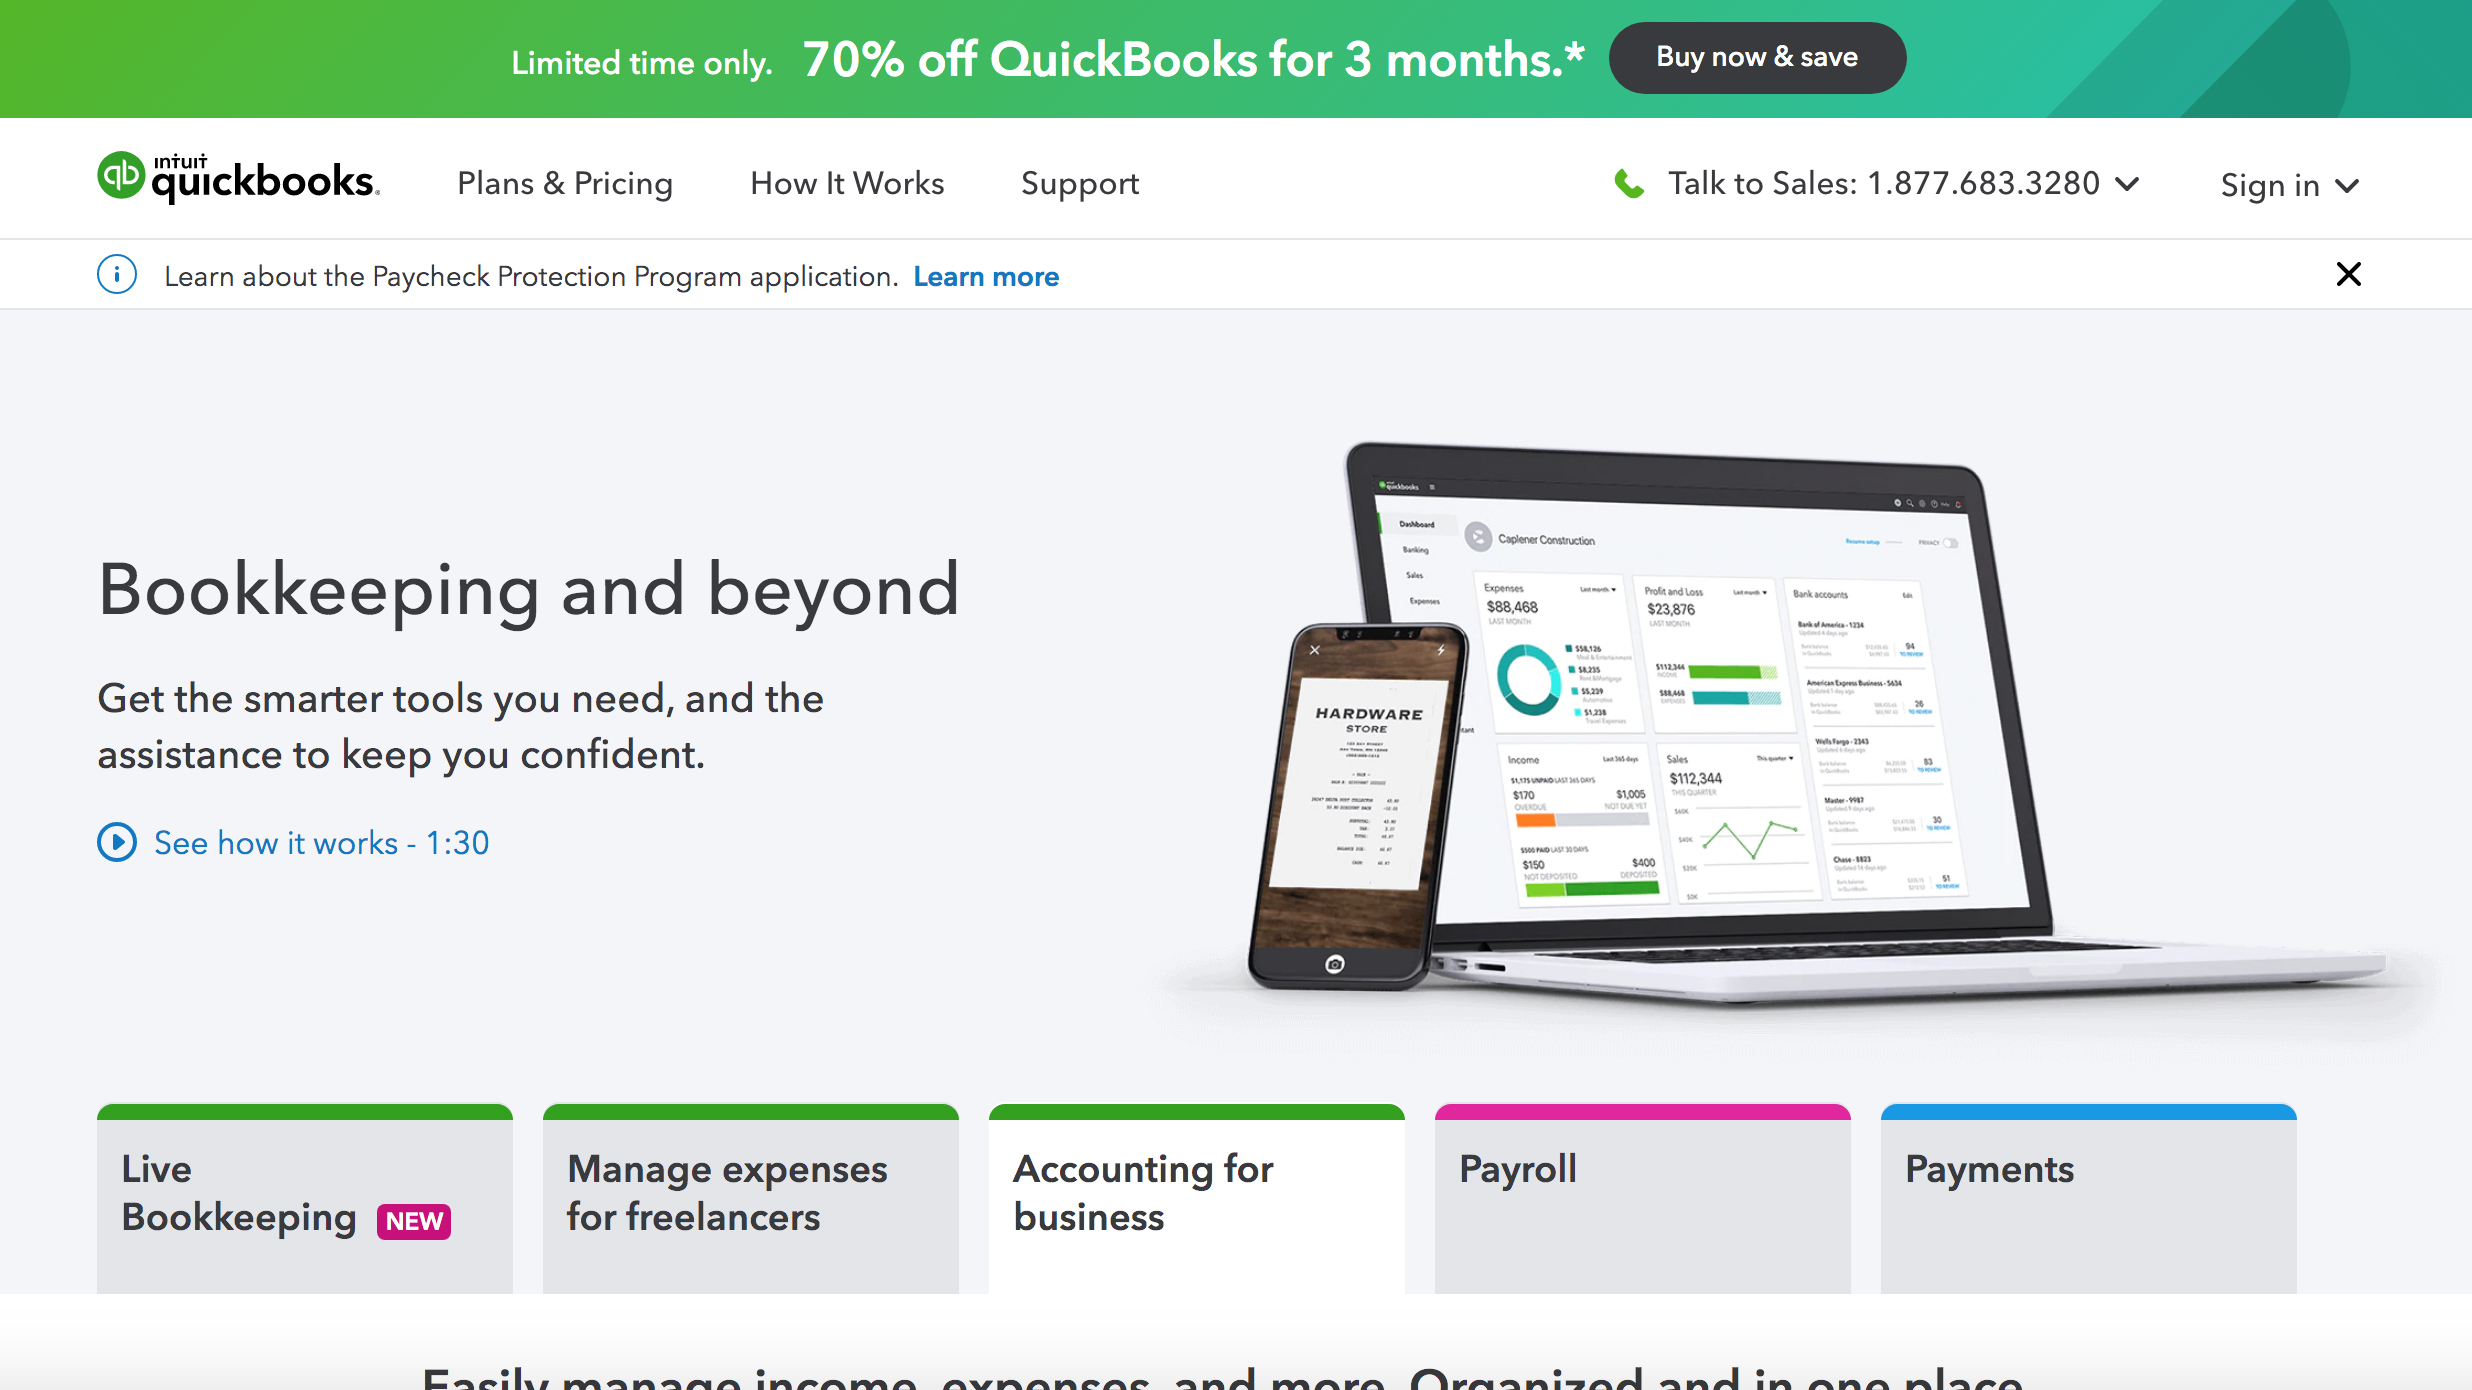 How many payroll offerings are available in QuickBooks online?